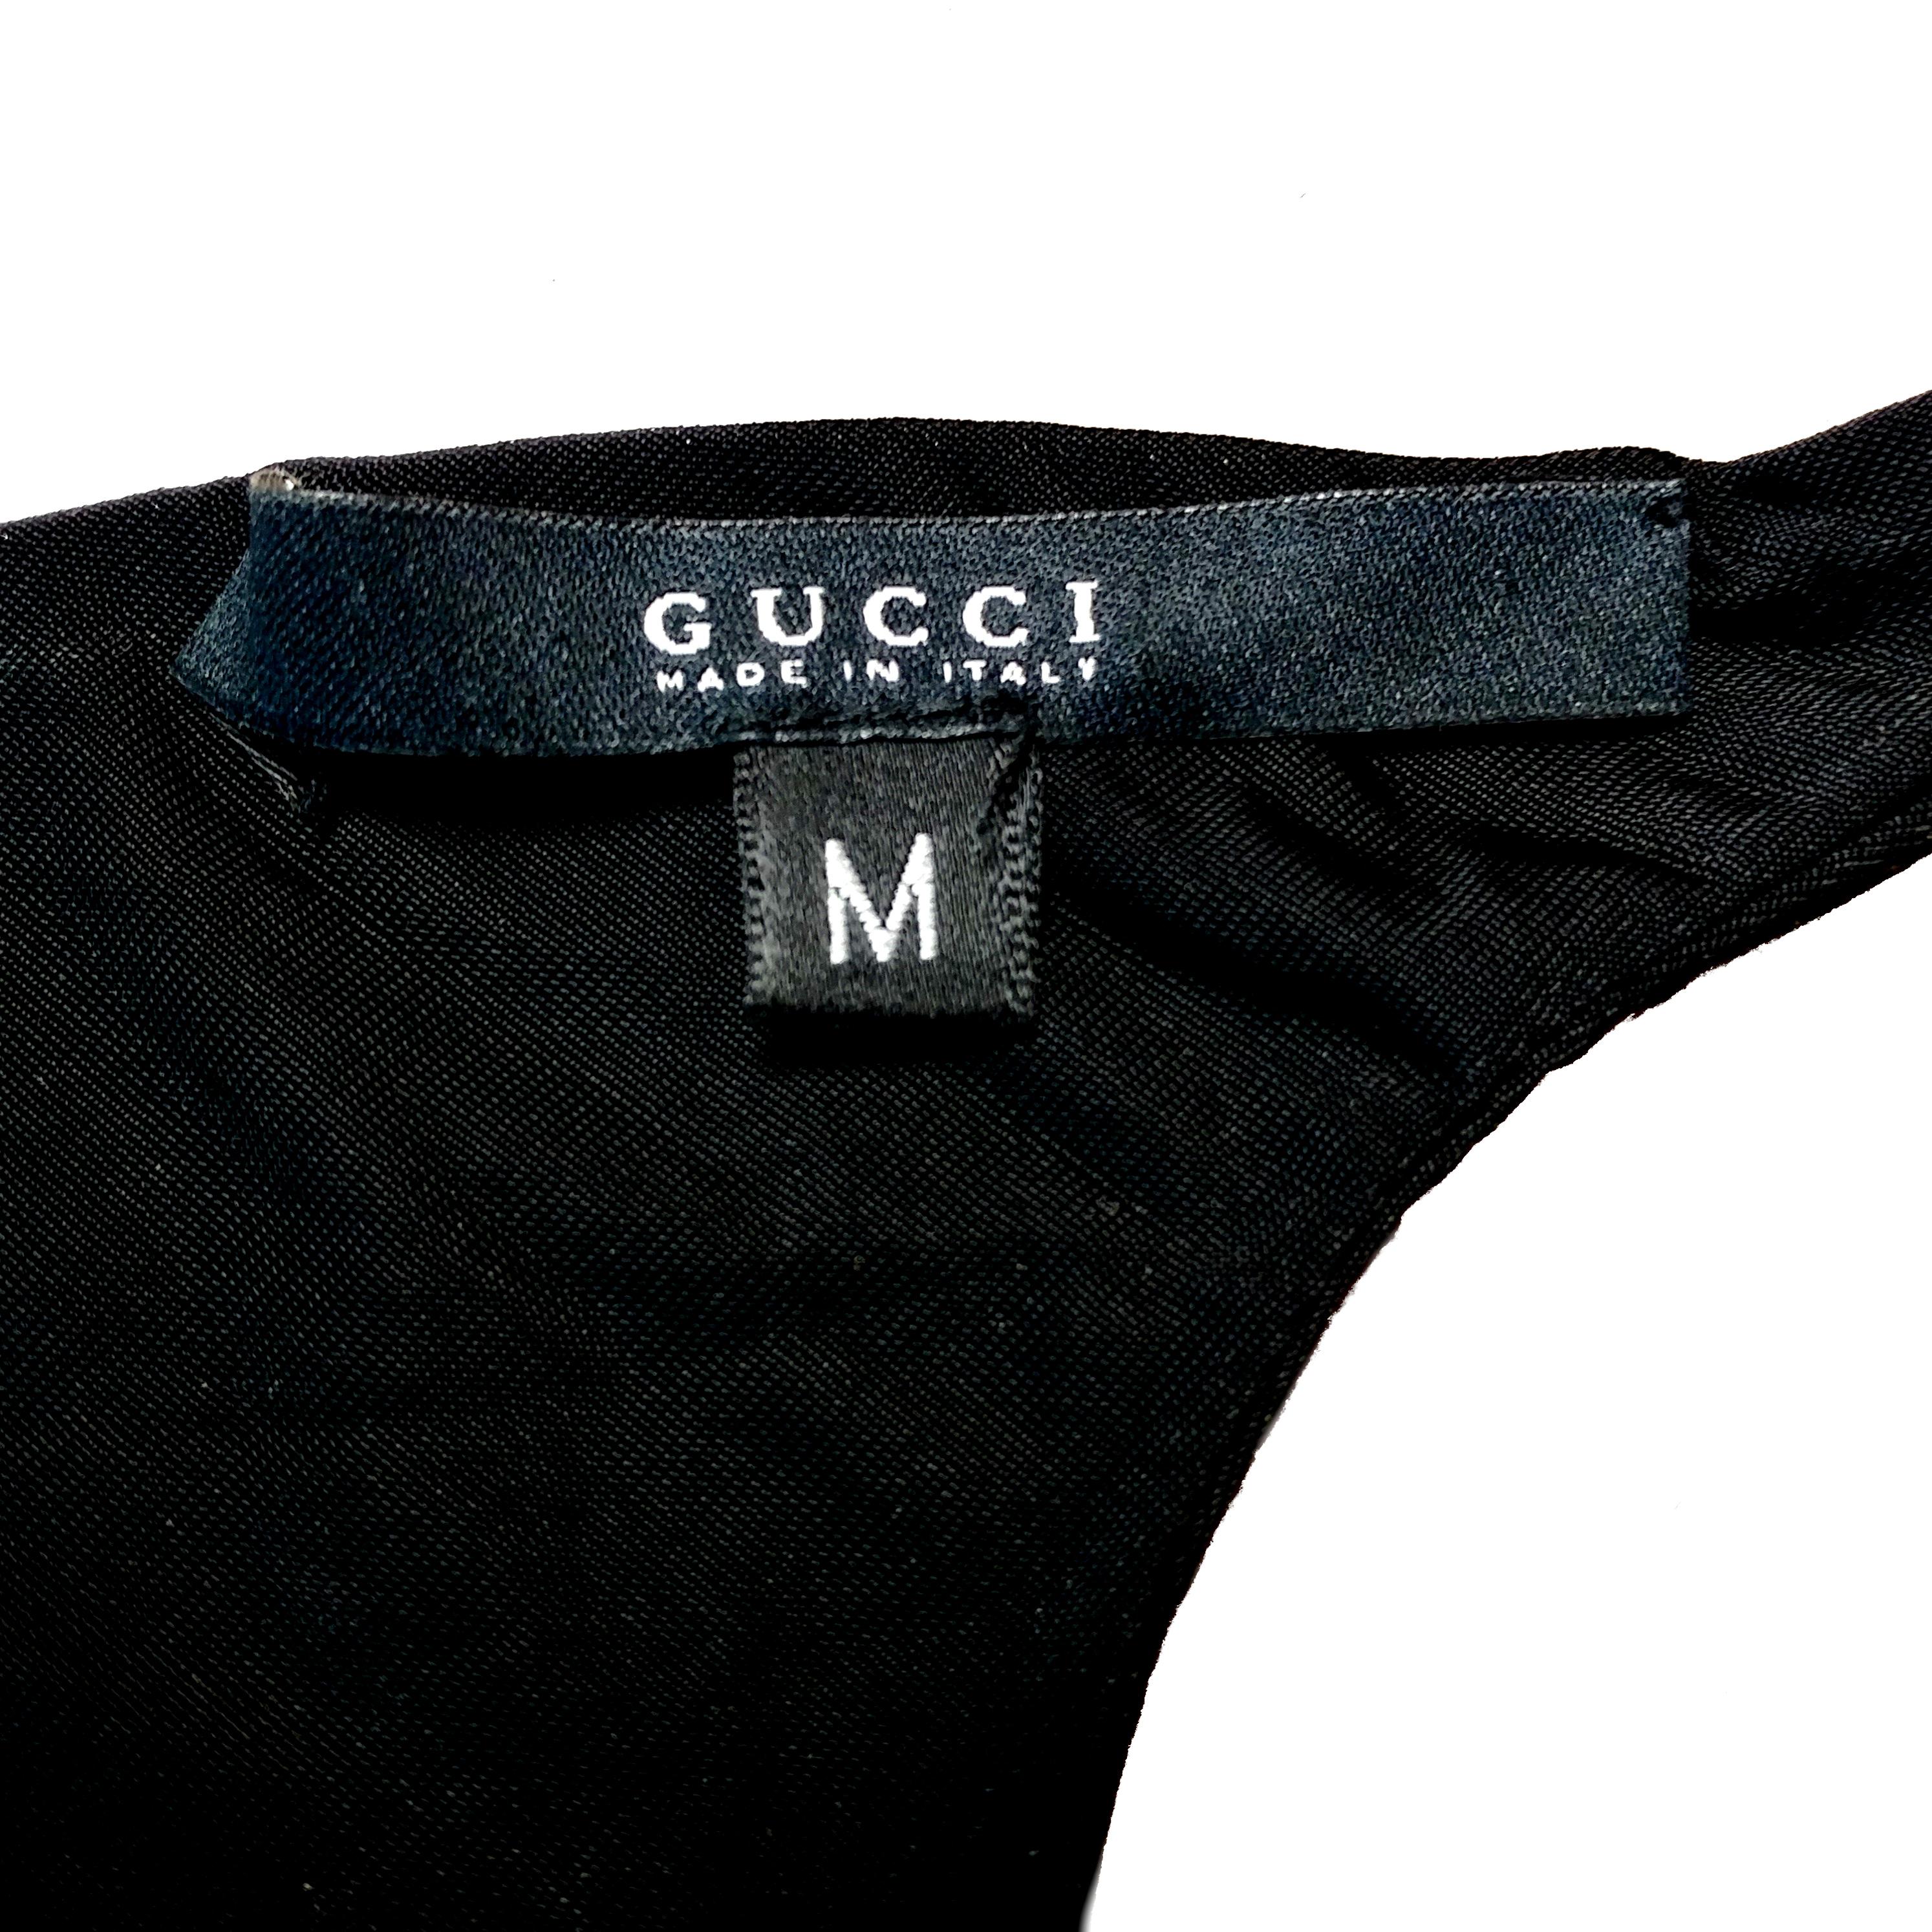 Women's GUCCI - Two Layers Viscose and Cupro Black Asymetrical Top by Alessandro Michele